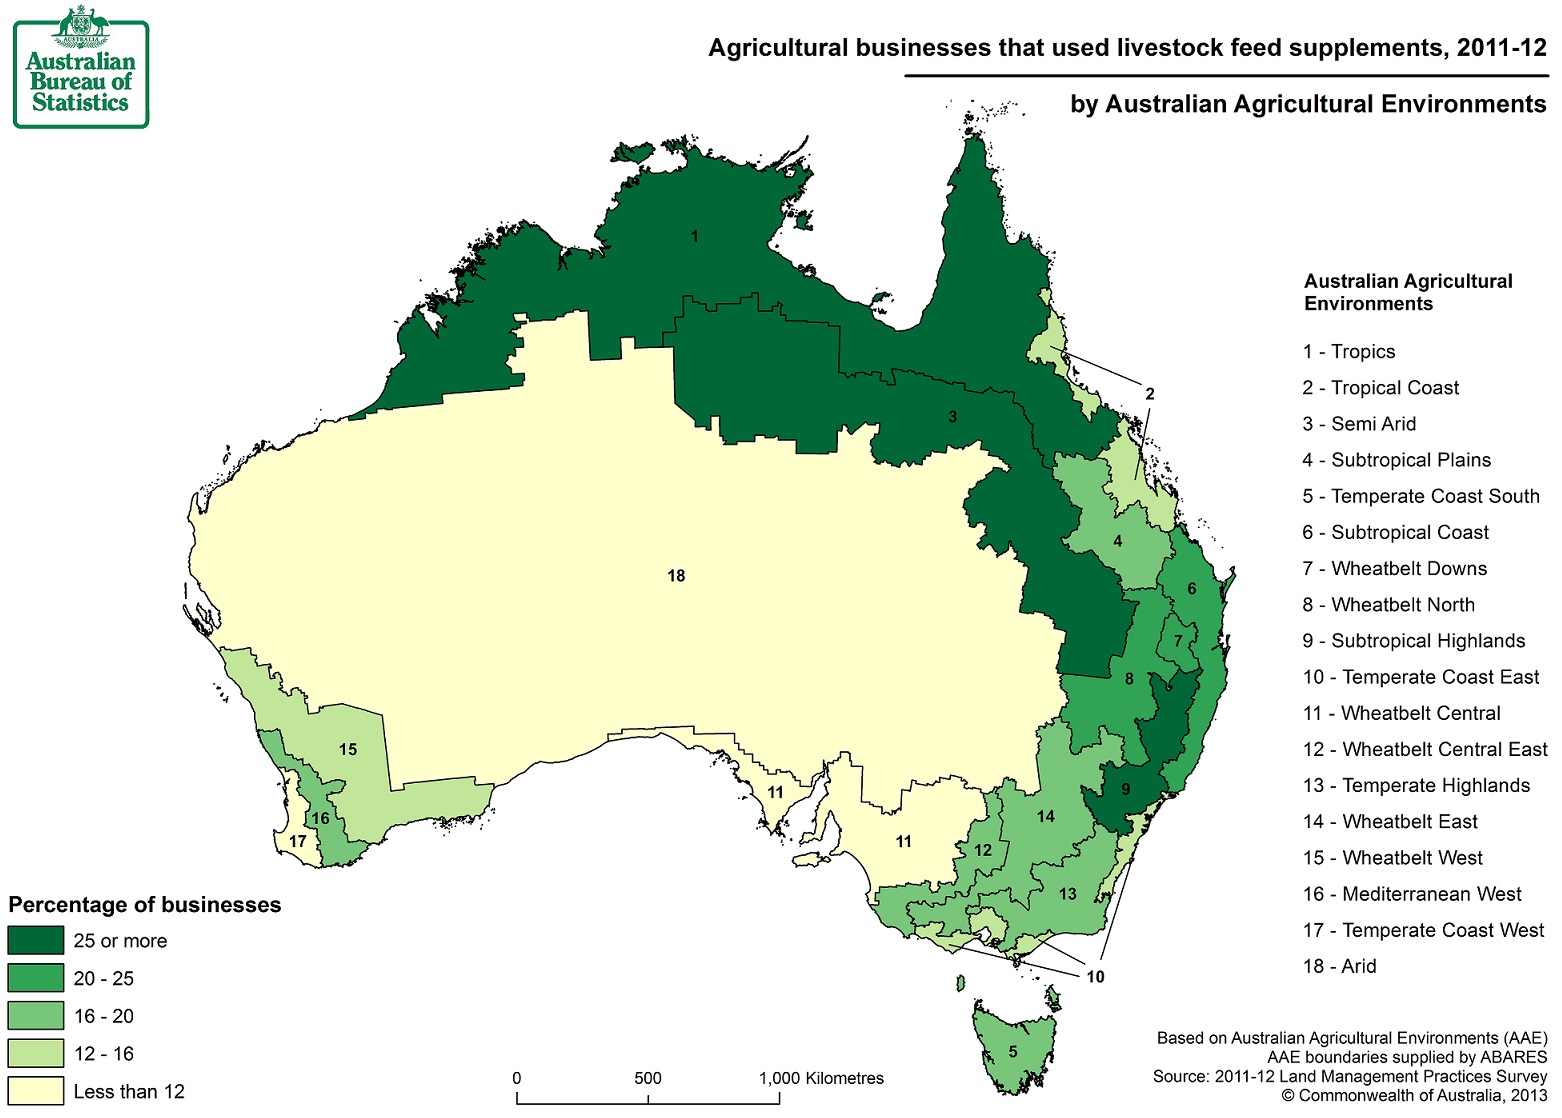 Image: Map of livestock feed supplements